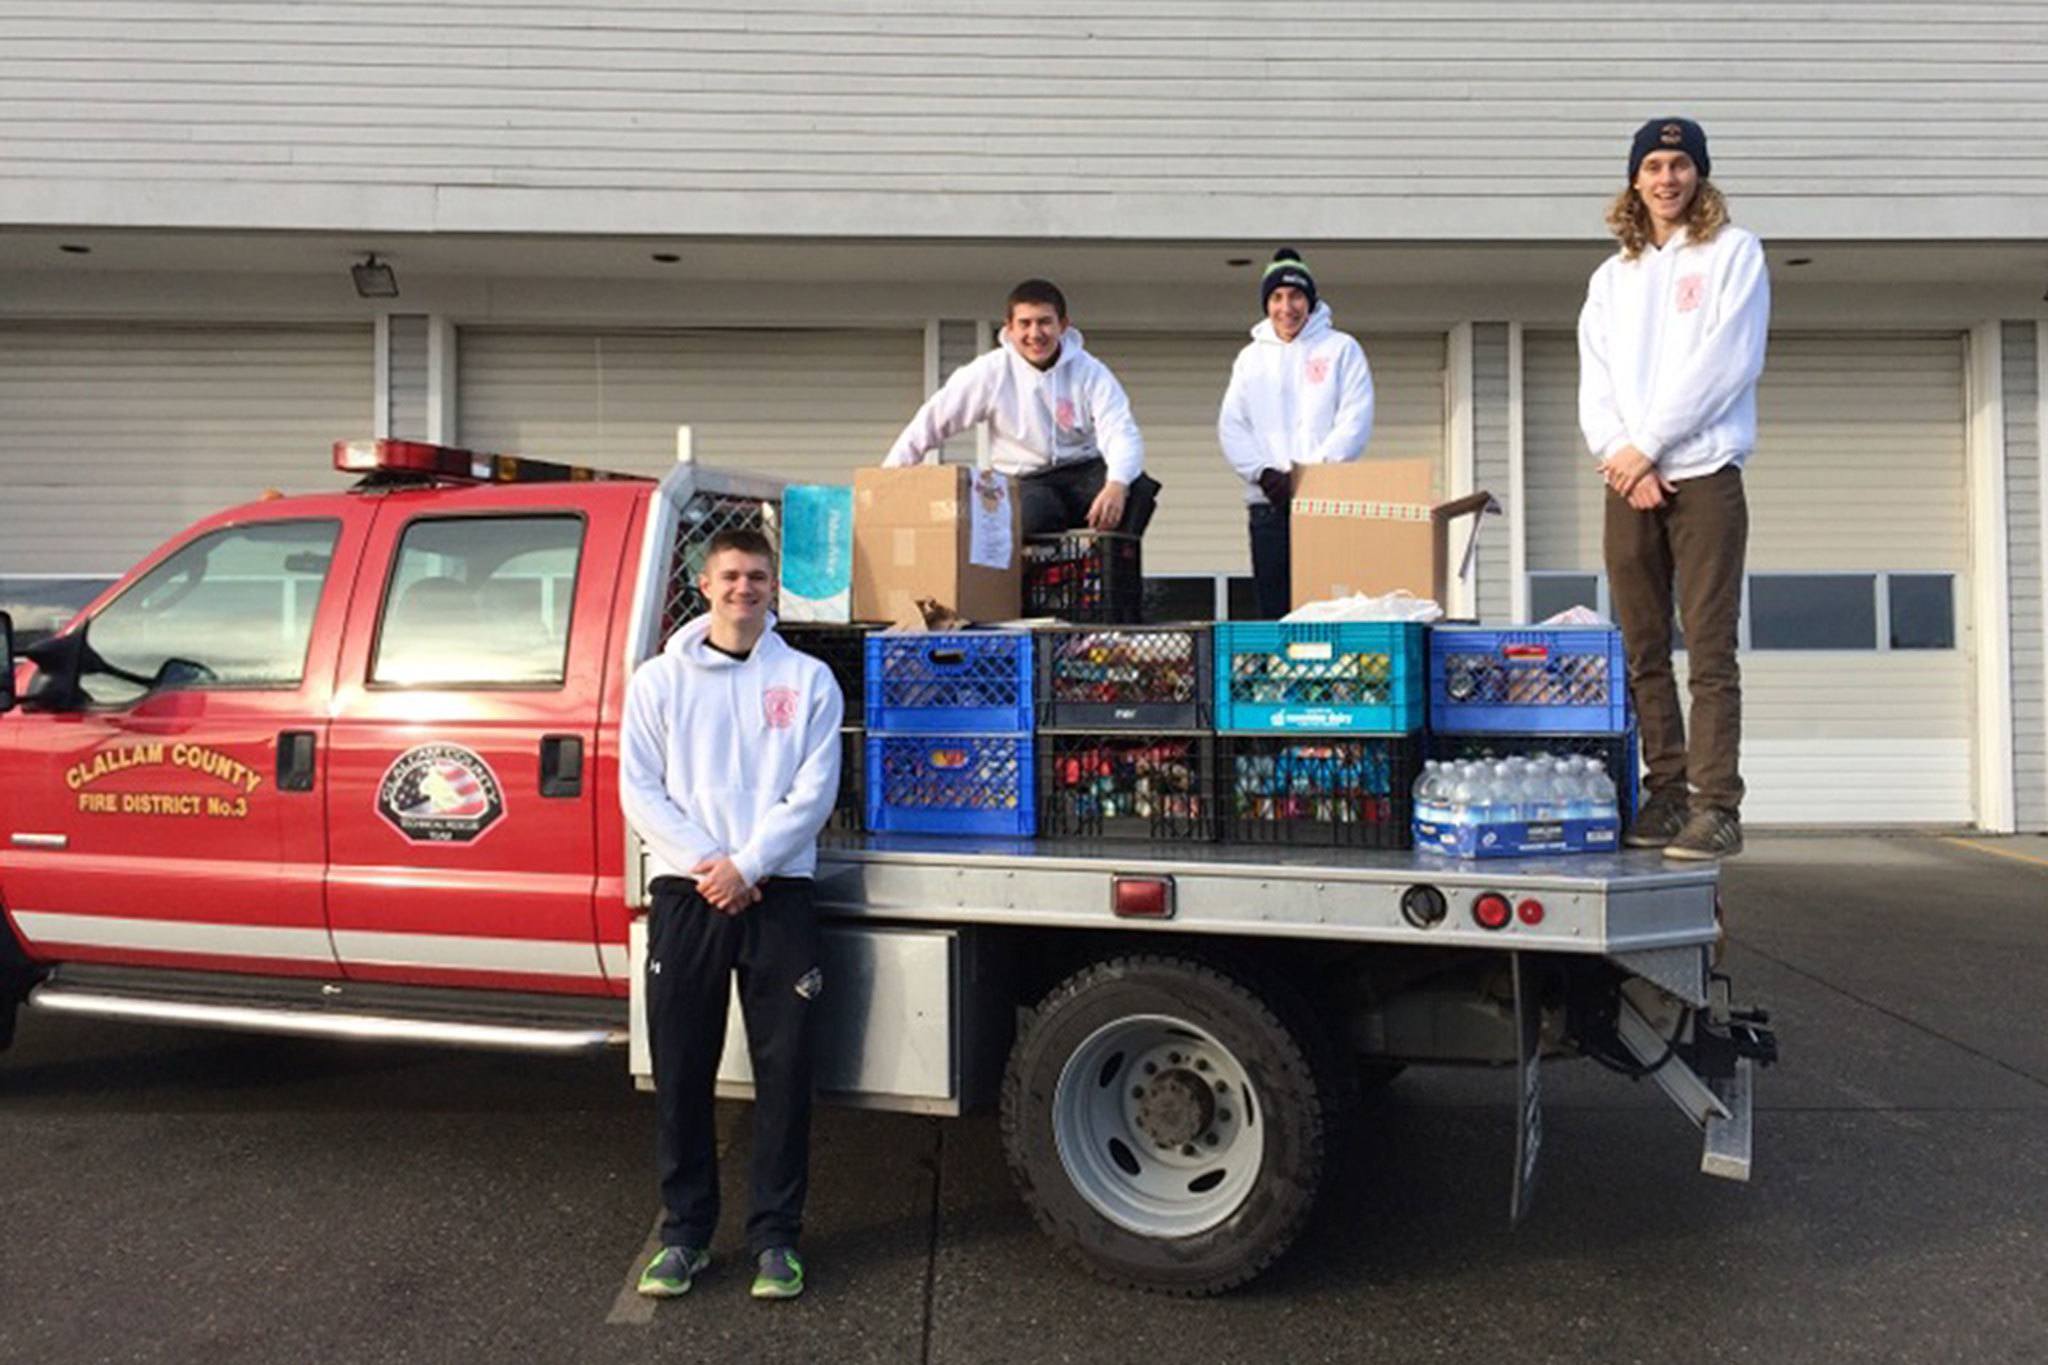 Leonard Horst                                Explorer Post 1003 members, from left, Michael Larsen, Tyler Smith, Christian Goodrich and Curtis Beery stand with the community’s donation of about 1,200 pounds of food.                                Santa’s Toy and Food Fire Brigade collected about 1,200 pounds of food and $600 for the Sequim Food Bank.